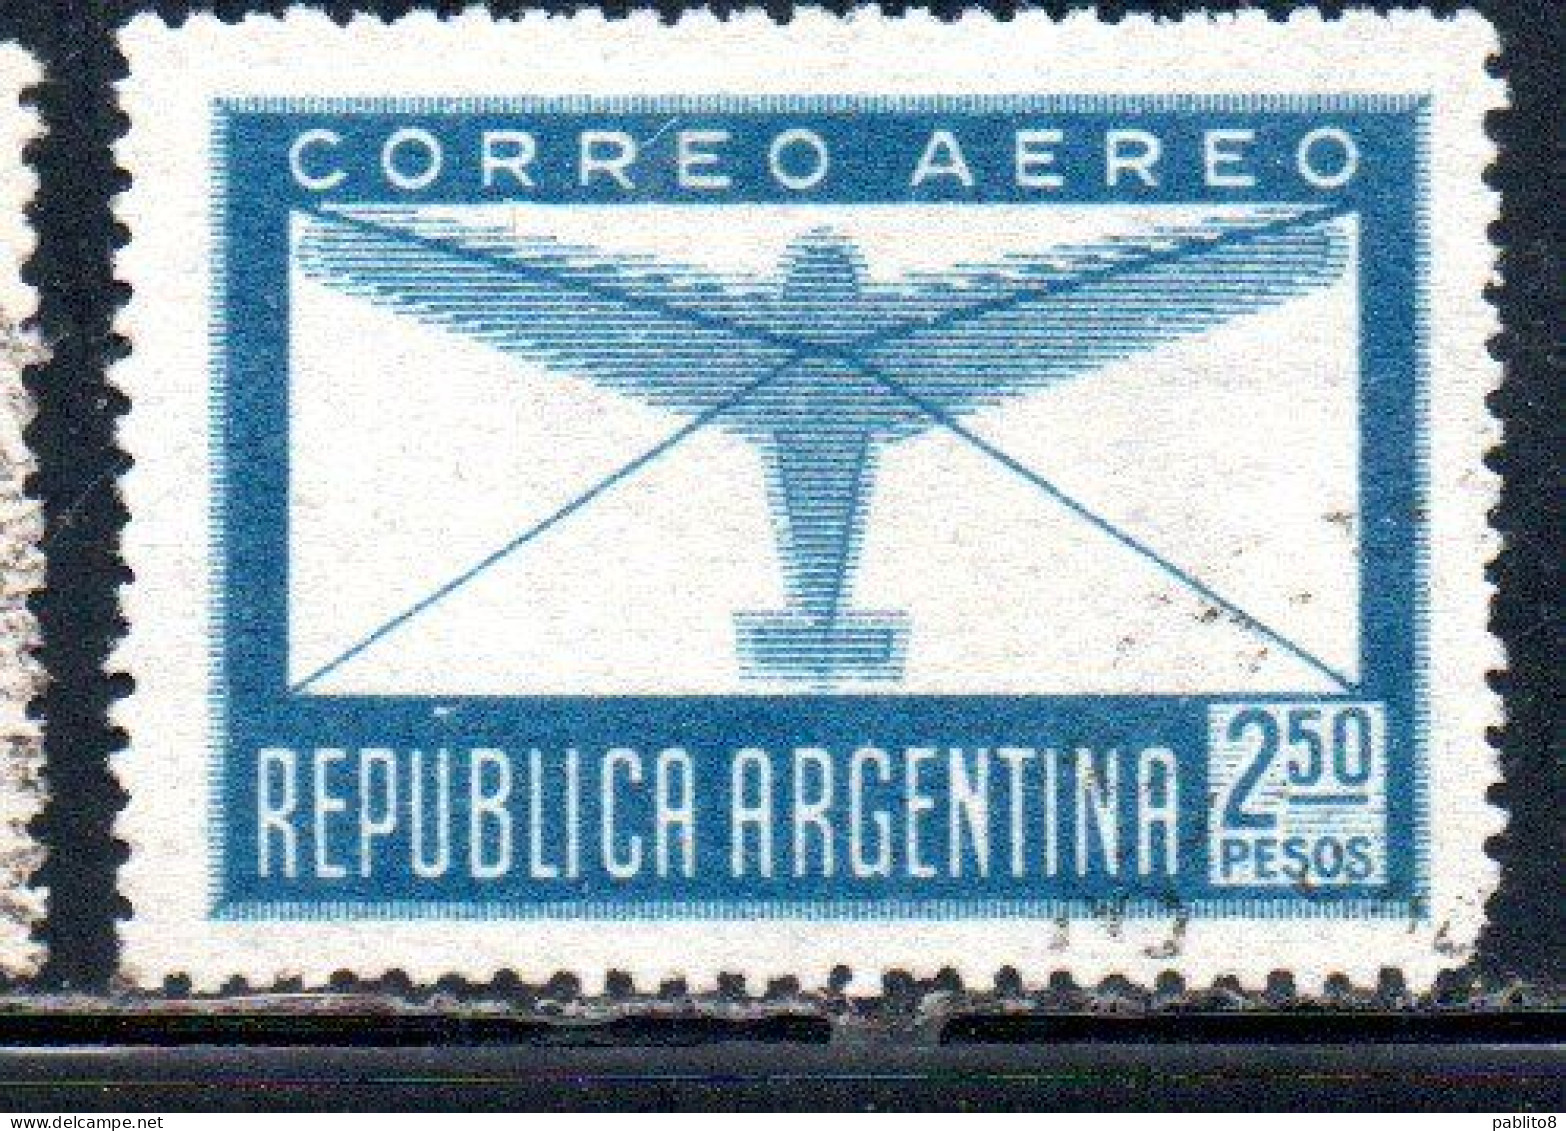 ARGENTINA 1942 1948  AIR POST MAIL CORREO AEREO AIRMAIL PLANE AND LETTER 2.50p USED USADO OBLITERE' - Airmail